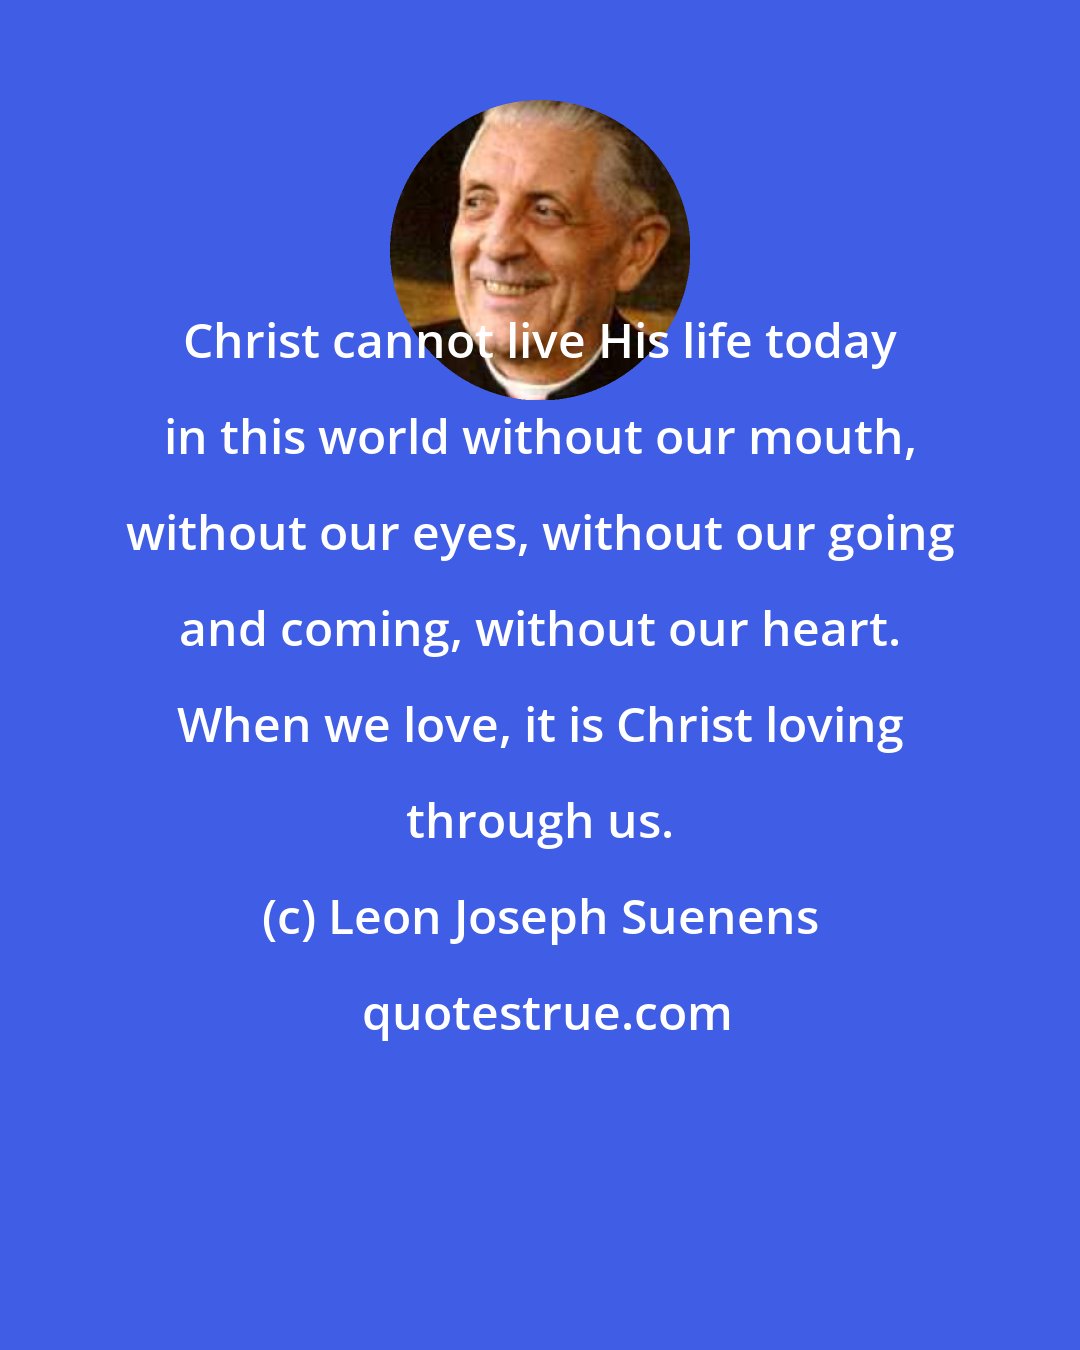 Leon Joseph Suenens: Christ cannot live His life today in this world without our mouth, without our eyes, without our going and coming, without our heart. When we love, it is Christ loving through us.